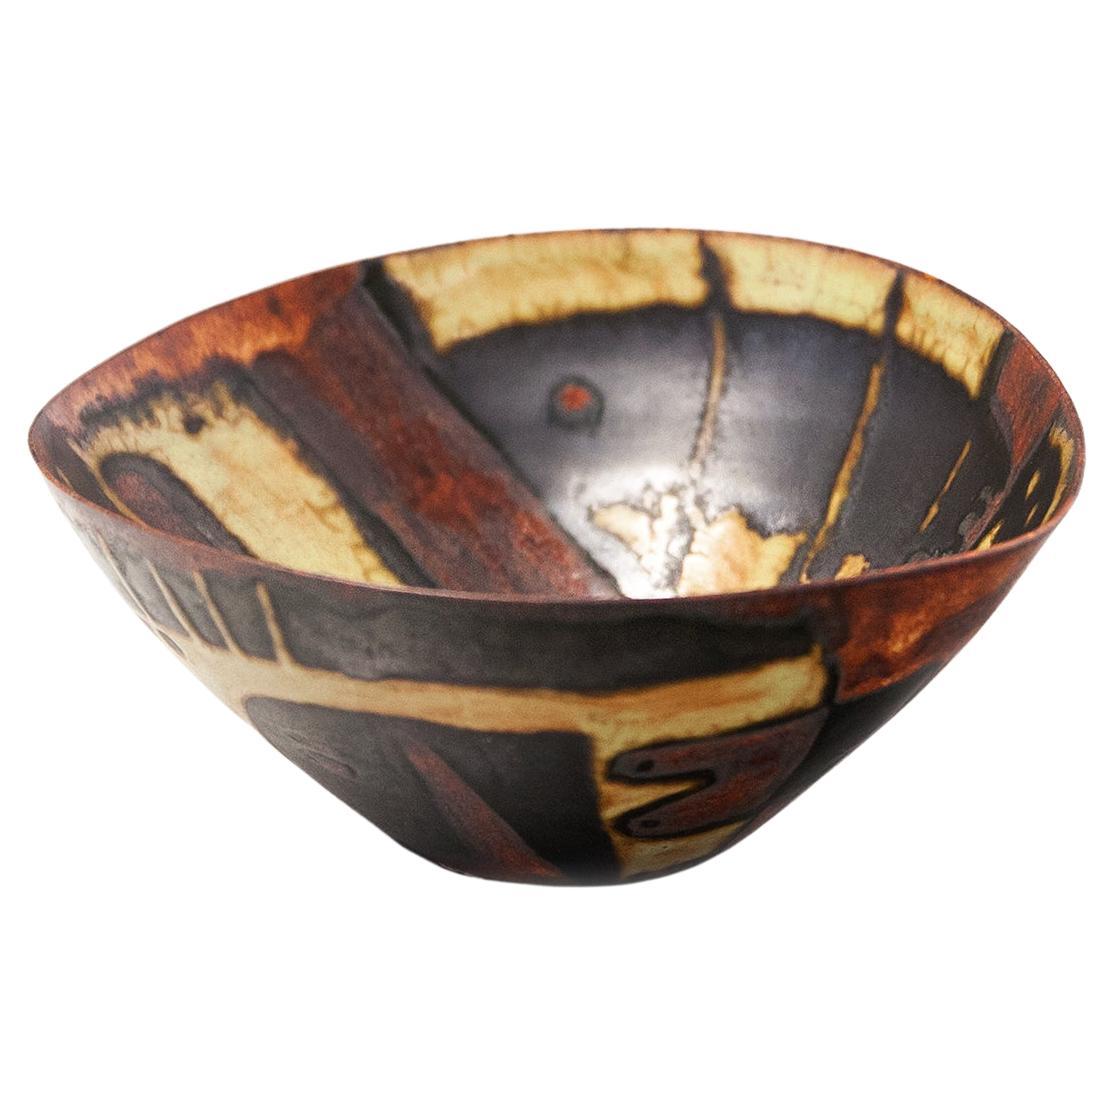 Beate Kuhn Abstract Ceramic Bowl 1960s For Sale